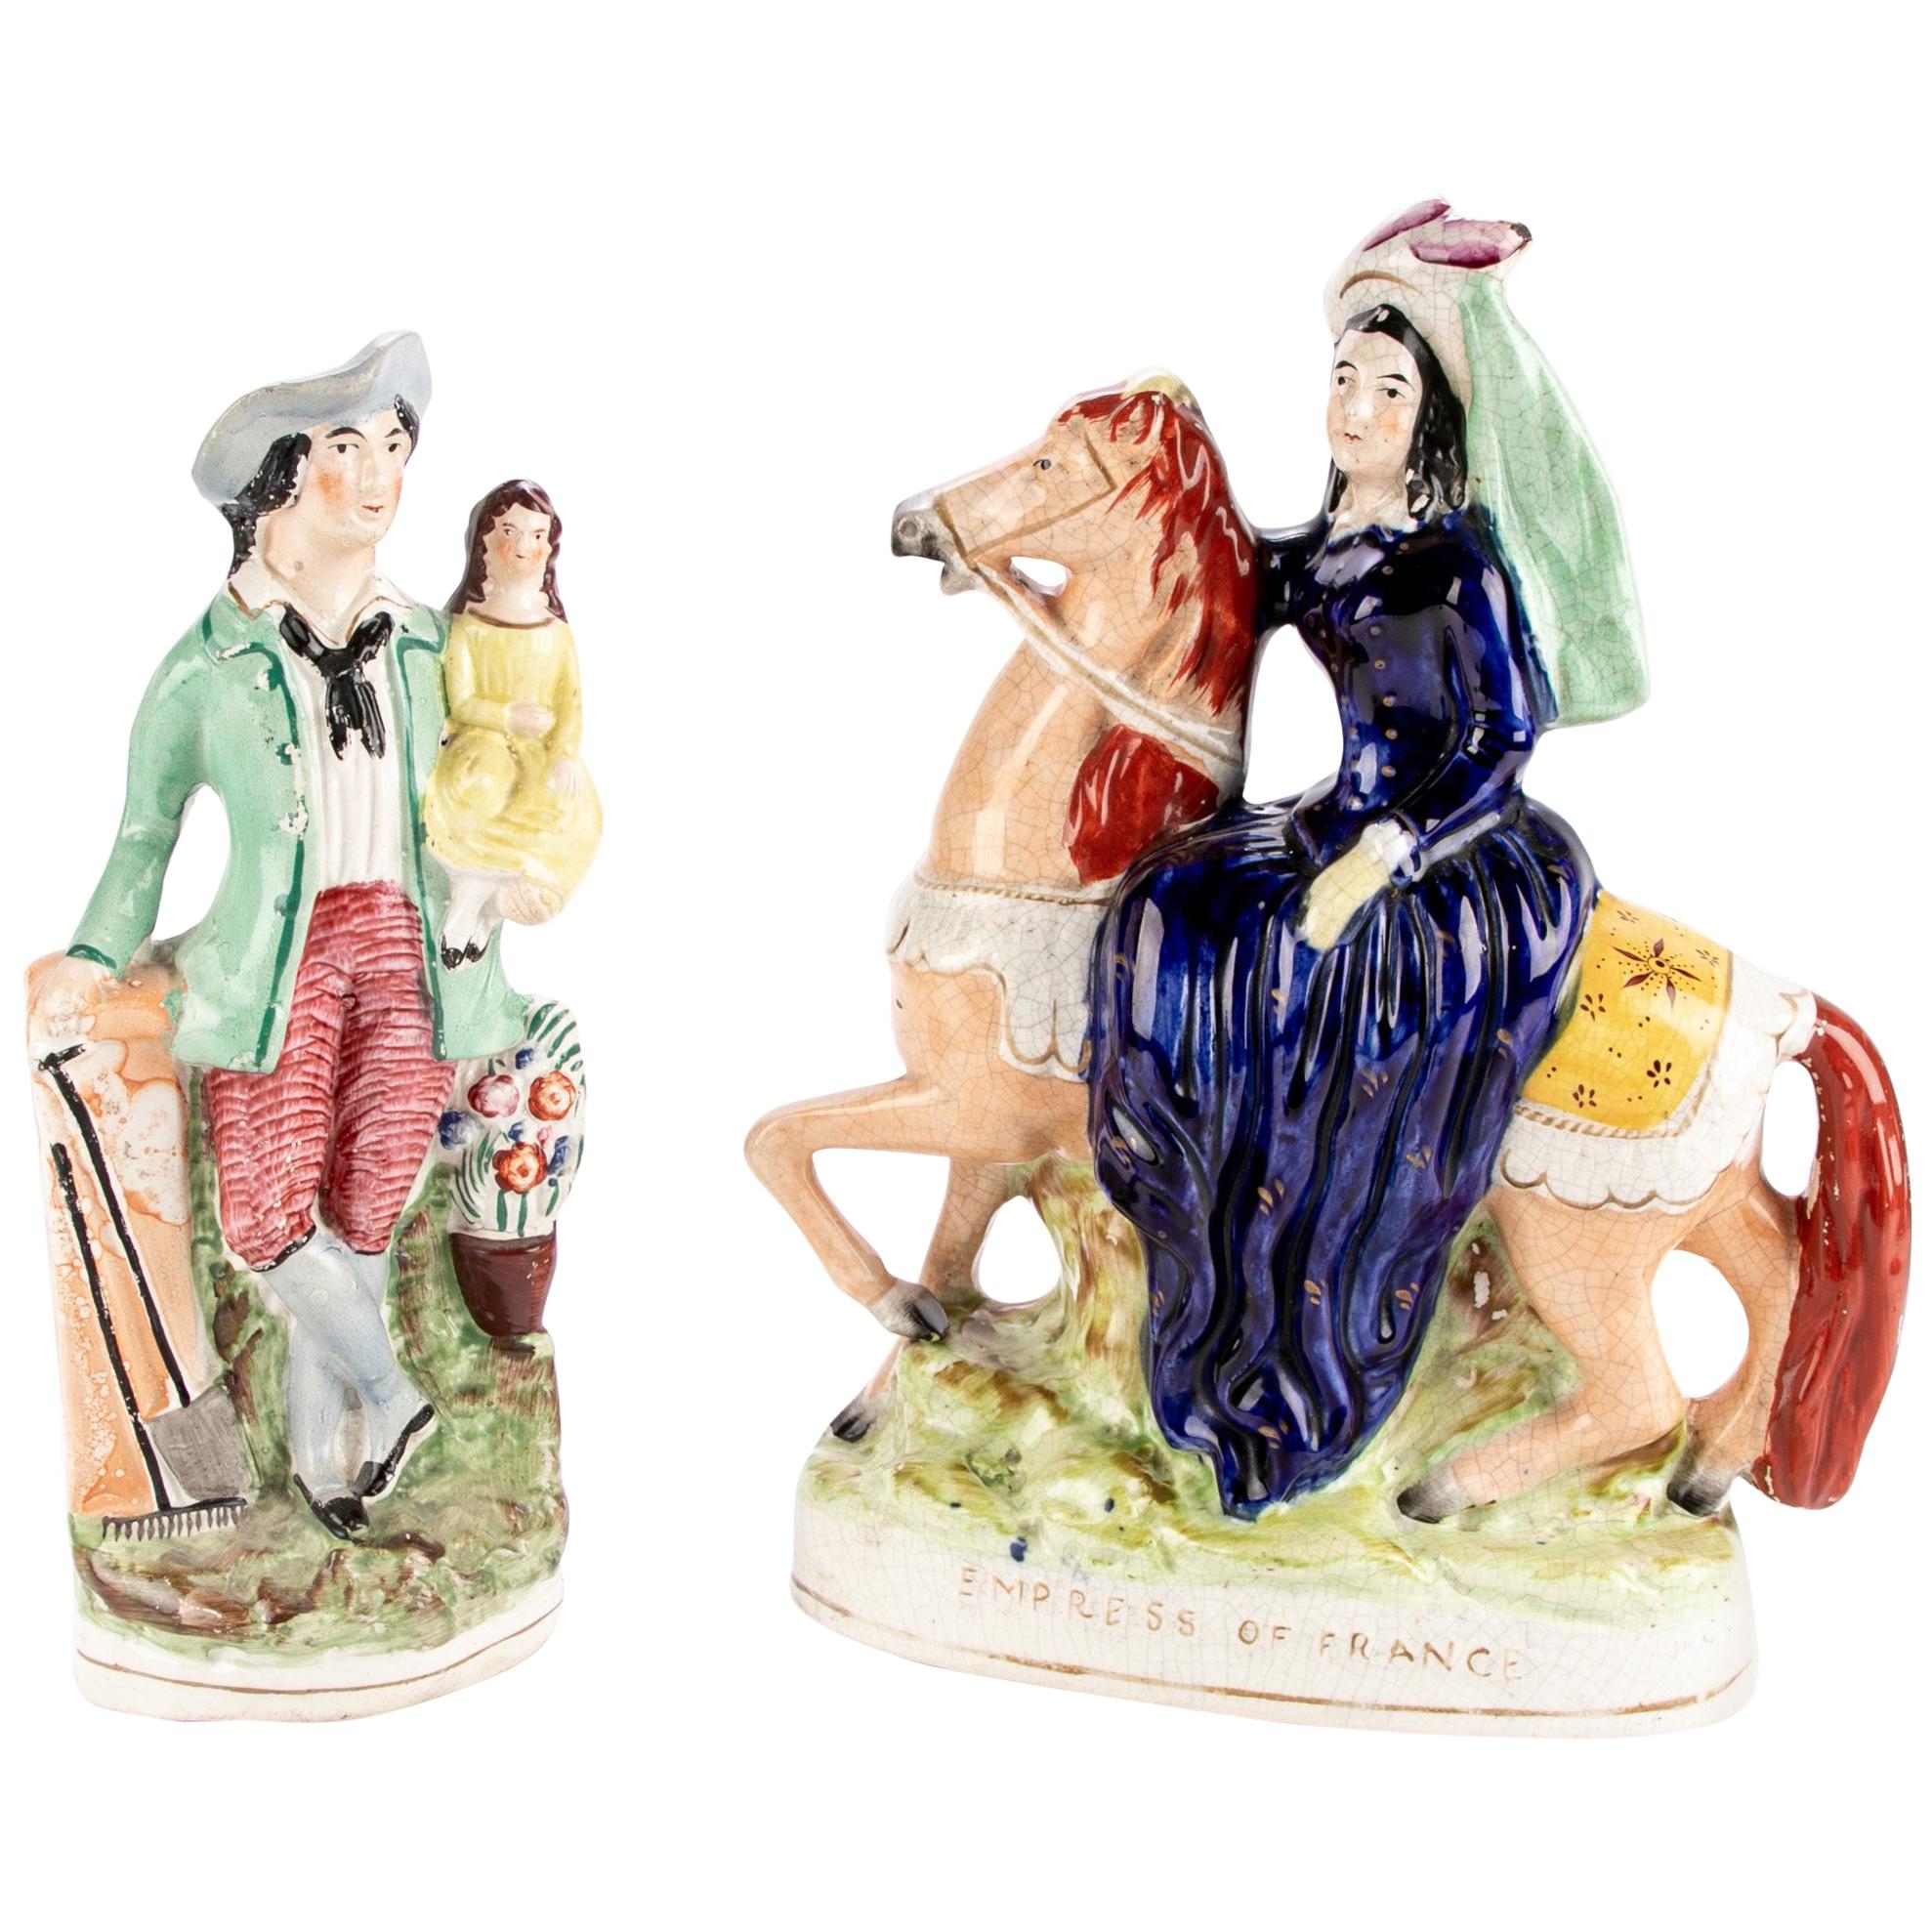 Two Antique Staffordshire Glazed and Painted Earthenware Figures